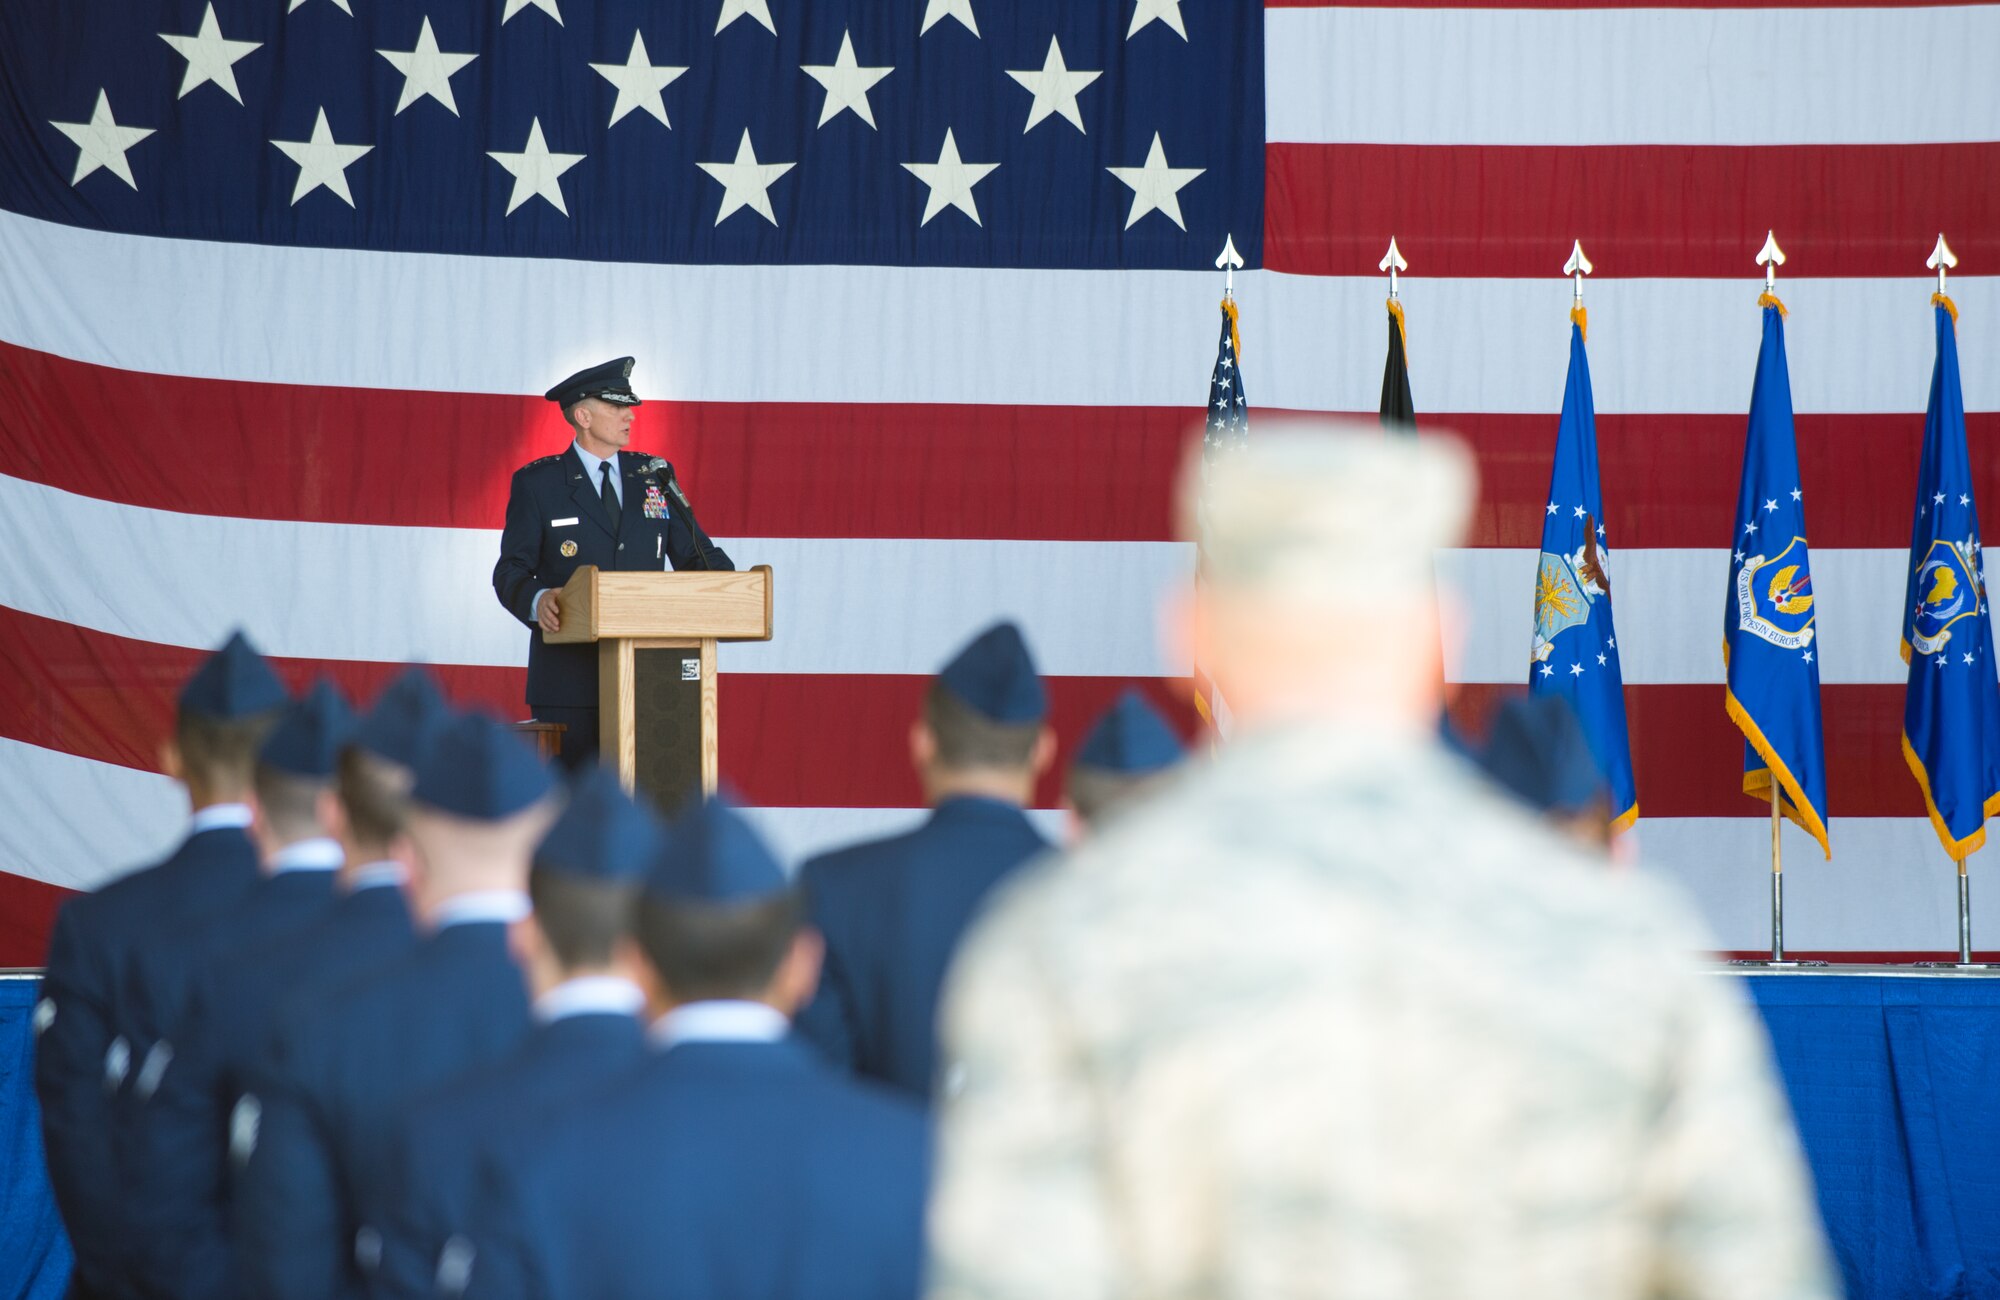 Lt. Gen. Timothy Ray, Third Air Force and 17th Expeditionary Air Force commander, speaks to Airmen representing Third Air Force and 17th Expeditionary Air Force July 2, 2015, at Ramstein Air Base, Germany. Ray now leads the command comprised of 10 wings, two groups, and the 603rd Air Operations Center. (U.S. Air Force photo/ Staff Sgt. Armando A. Schwier-Morales)